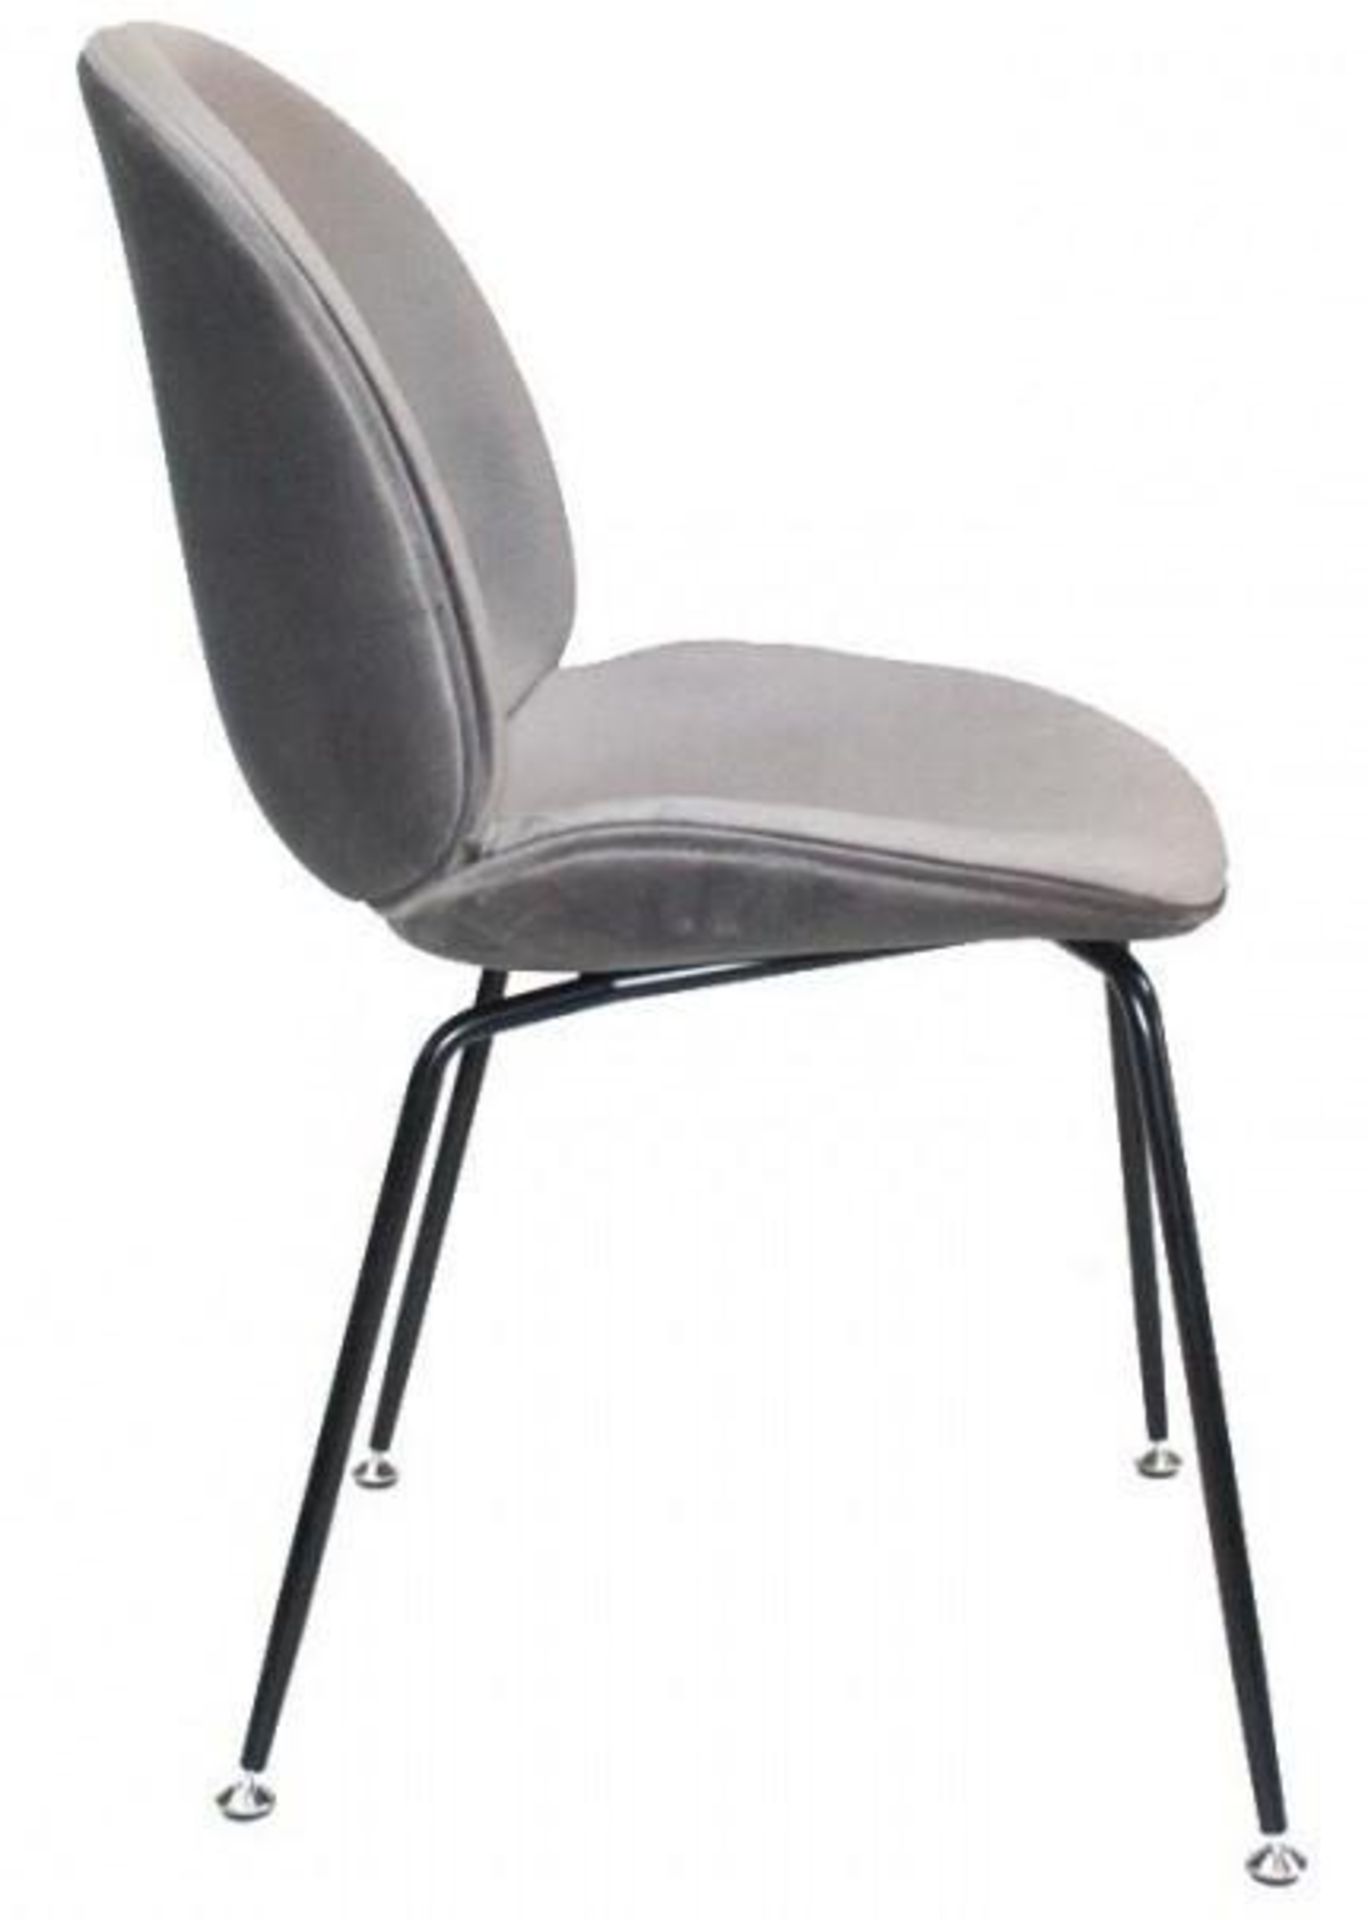 2 x GRACE Upholstered Contemporary Dining Chairs In Grey Velvet - Dimensions: W48 x D50 x H85 cm - B - Image 2 of 3